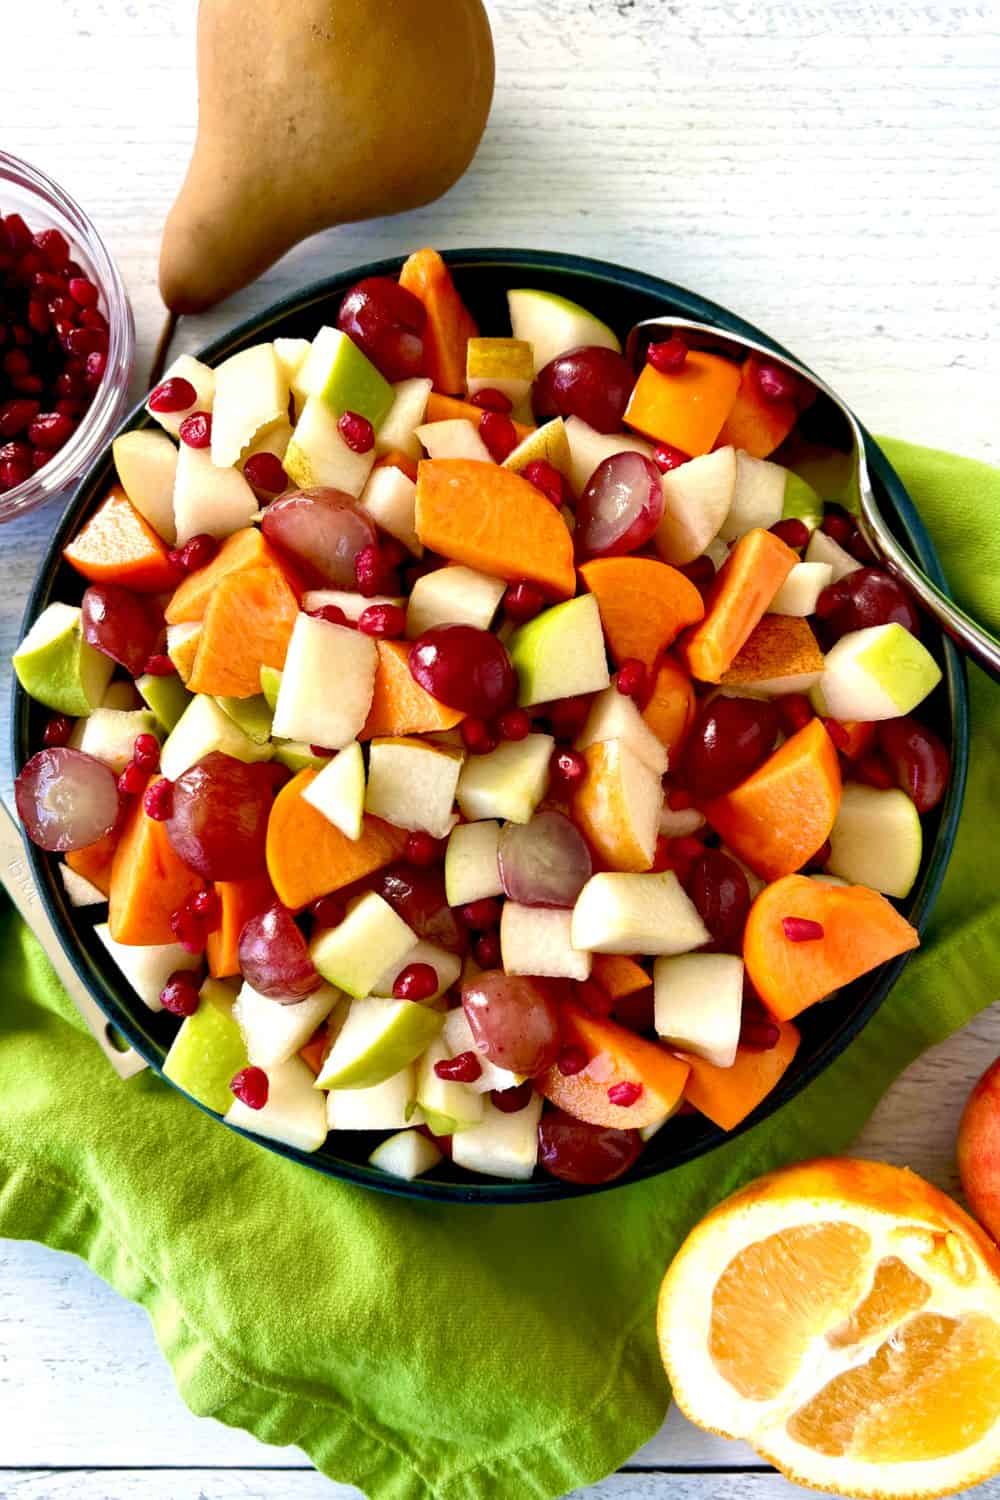 A fruit salad for Thanksgiving in a blue bowl surrounded by an apple, a pear, an orange half and a bowl of pomegranate seeds.